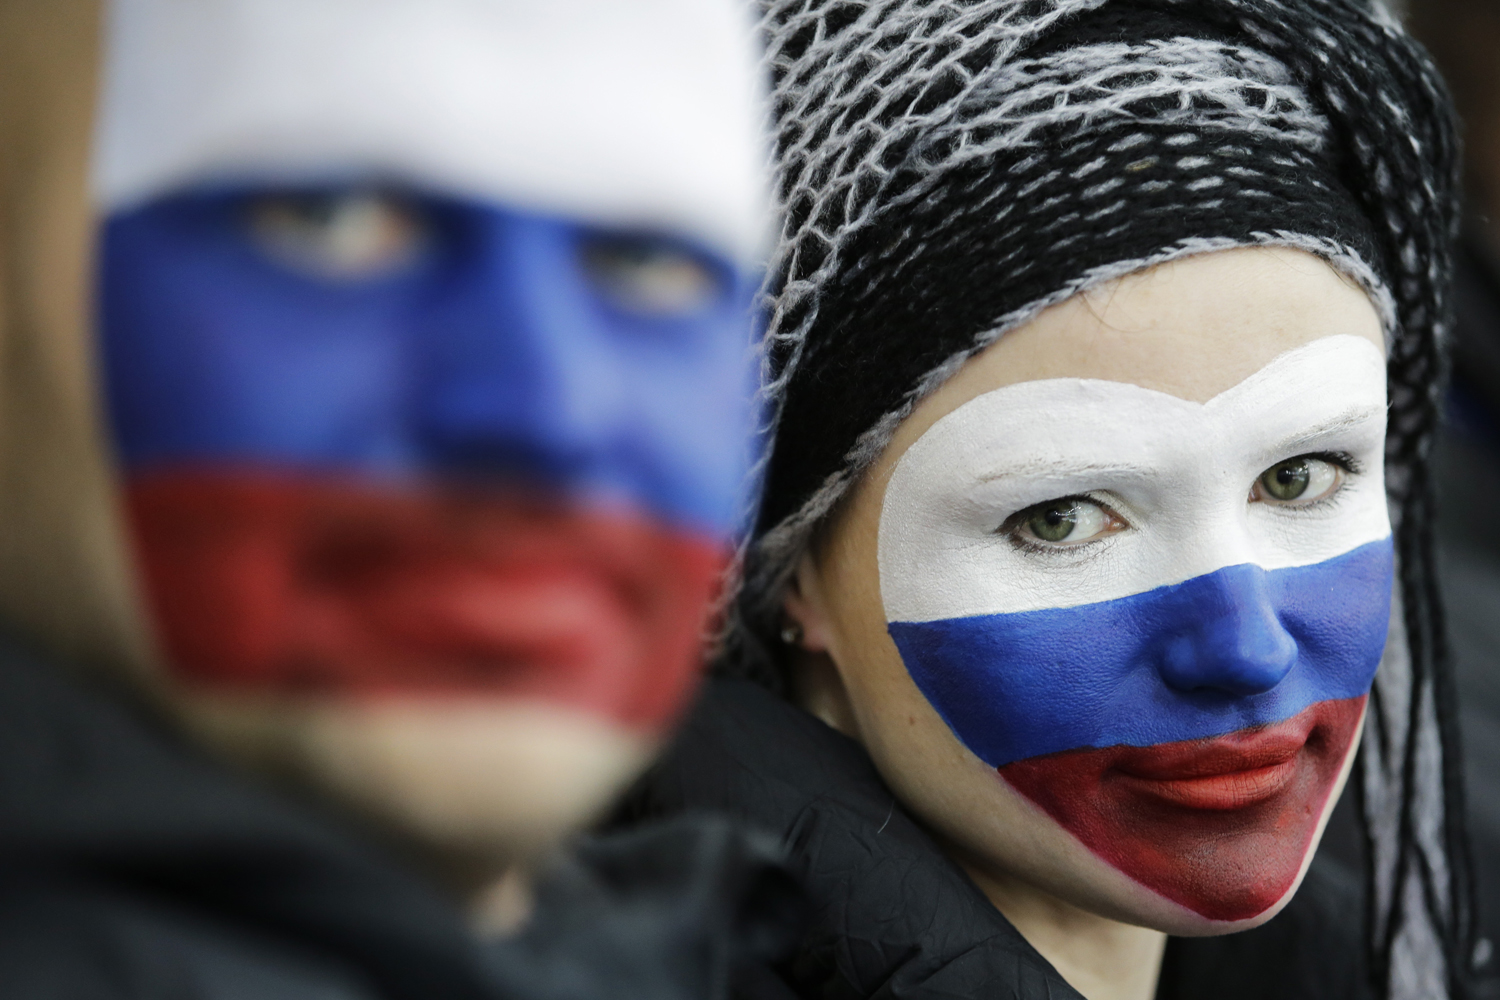 Russian skating fans, faces painted with the colors of their national flag, wait for the start of the women's 1,500-meter speedskating race at the Adler Arena Skating Center during the 2014 Winter Olympics, Sunday, Feb. 16, 2014, in Sochi, Russia.